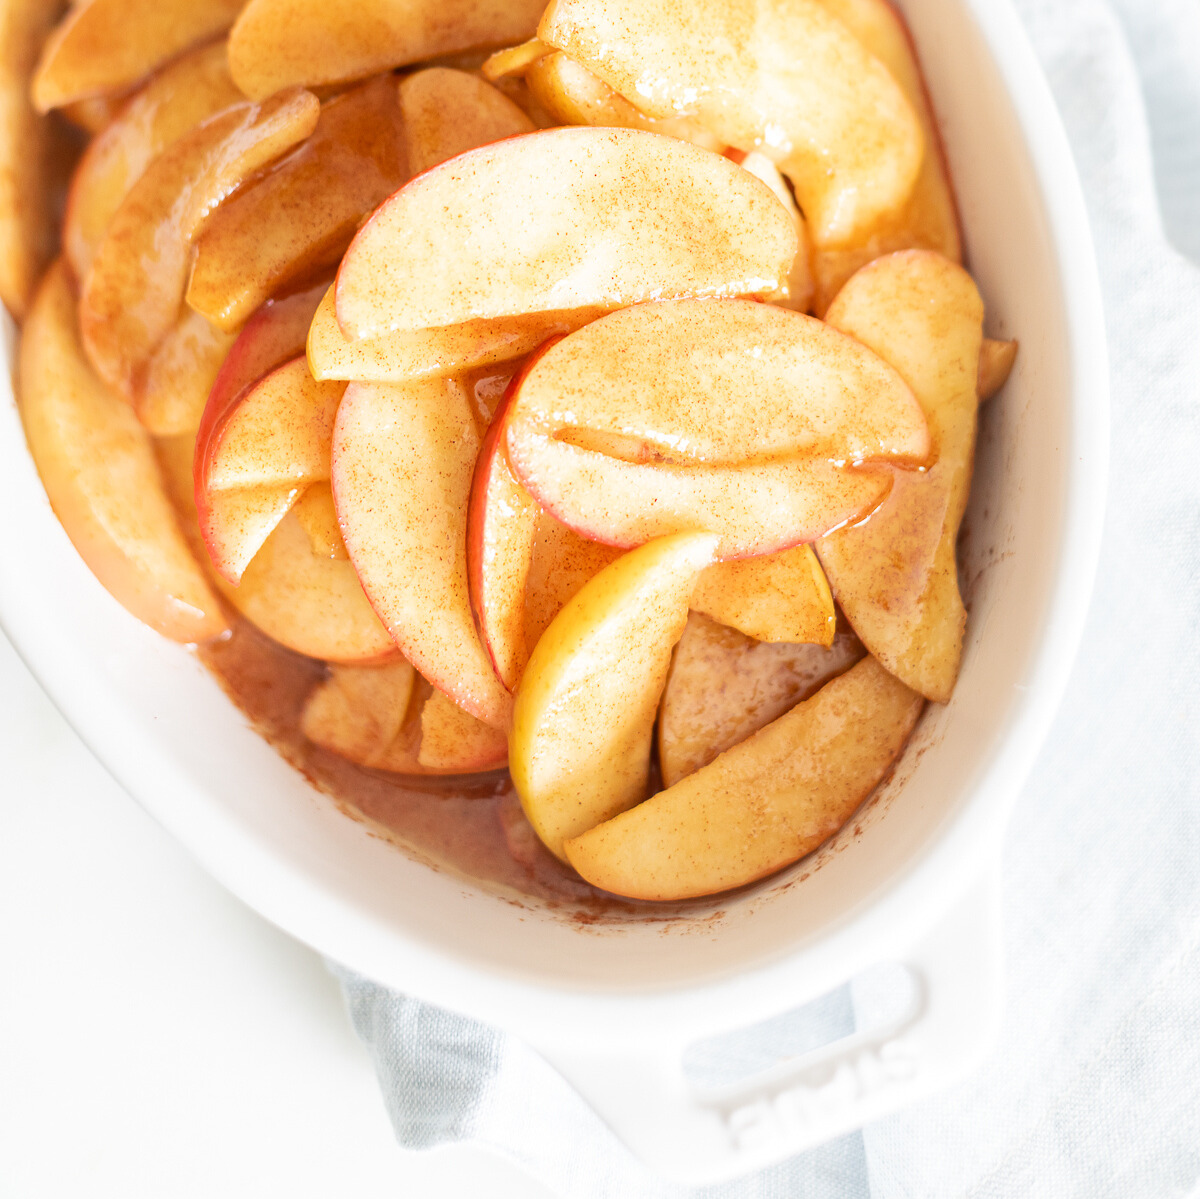 Four Ingredient Baked Apple Slices